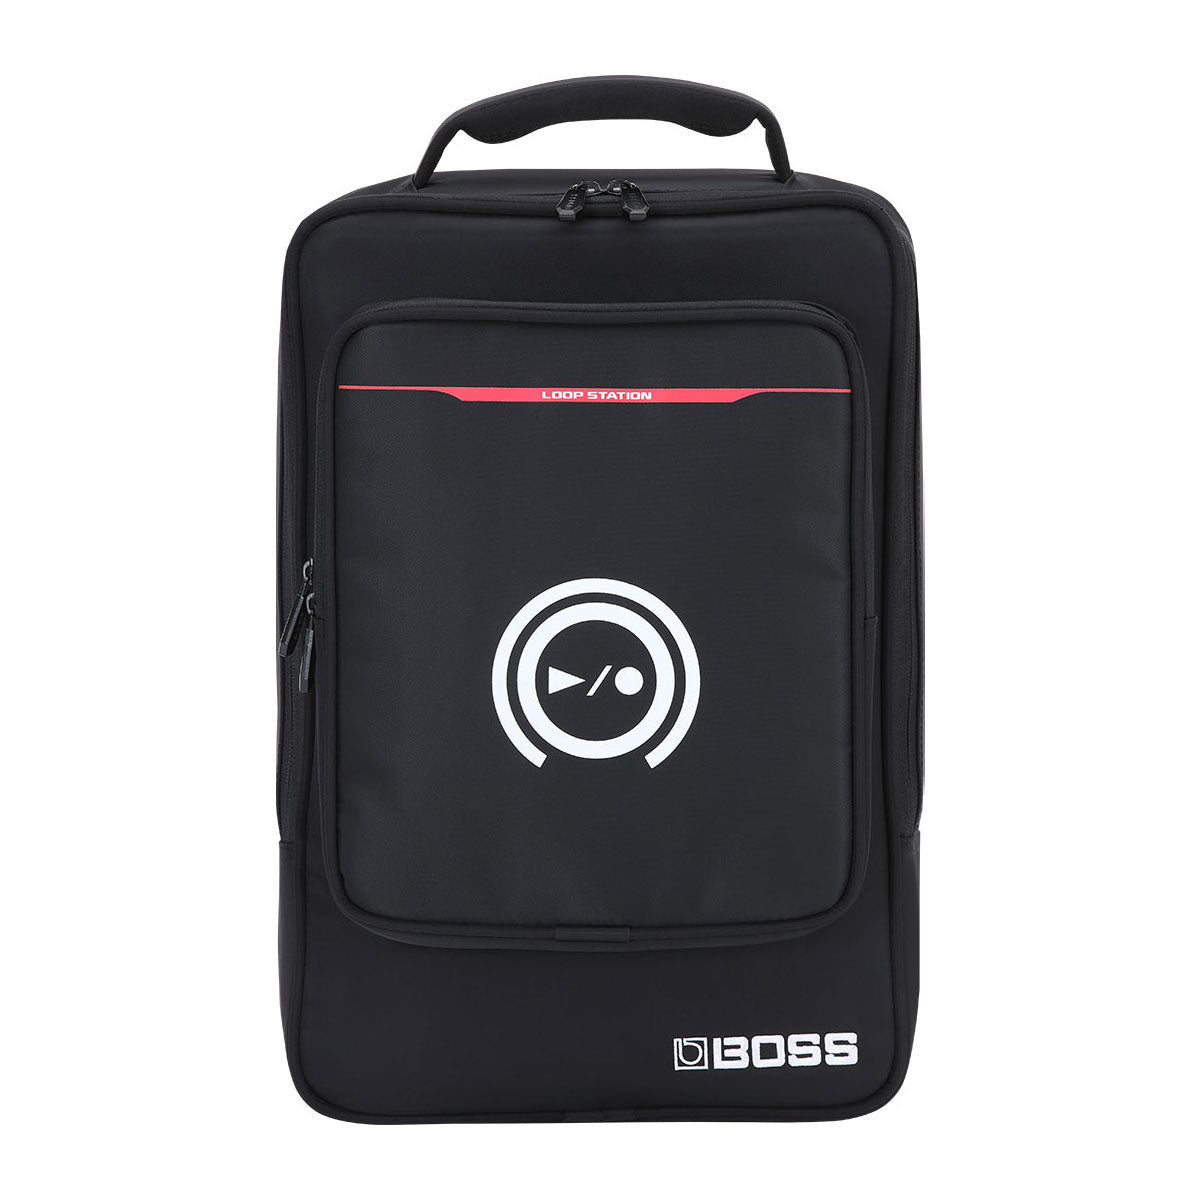 Roland Carry Bag CB505 Slimline Backpack for the RC-505mkII and RC-505 Loop Stations